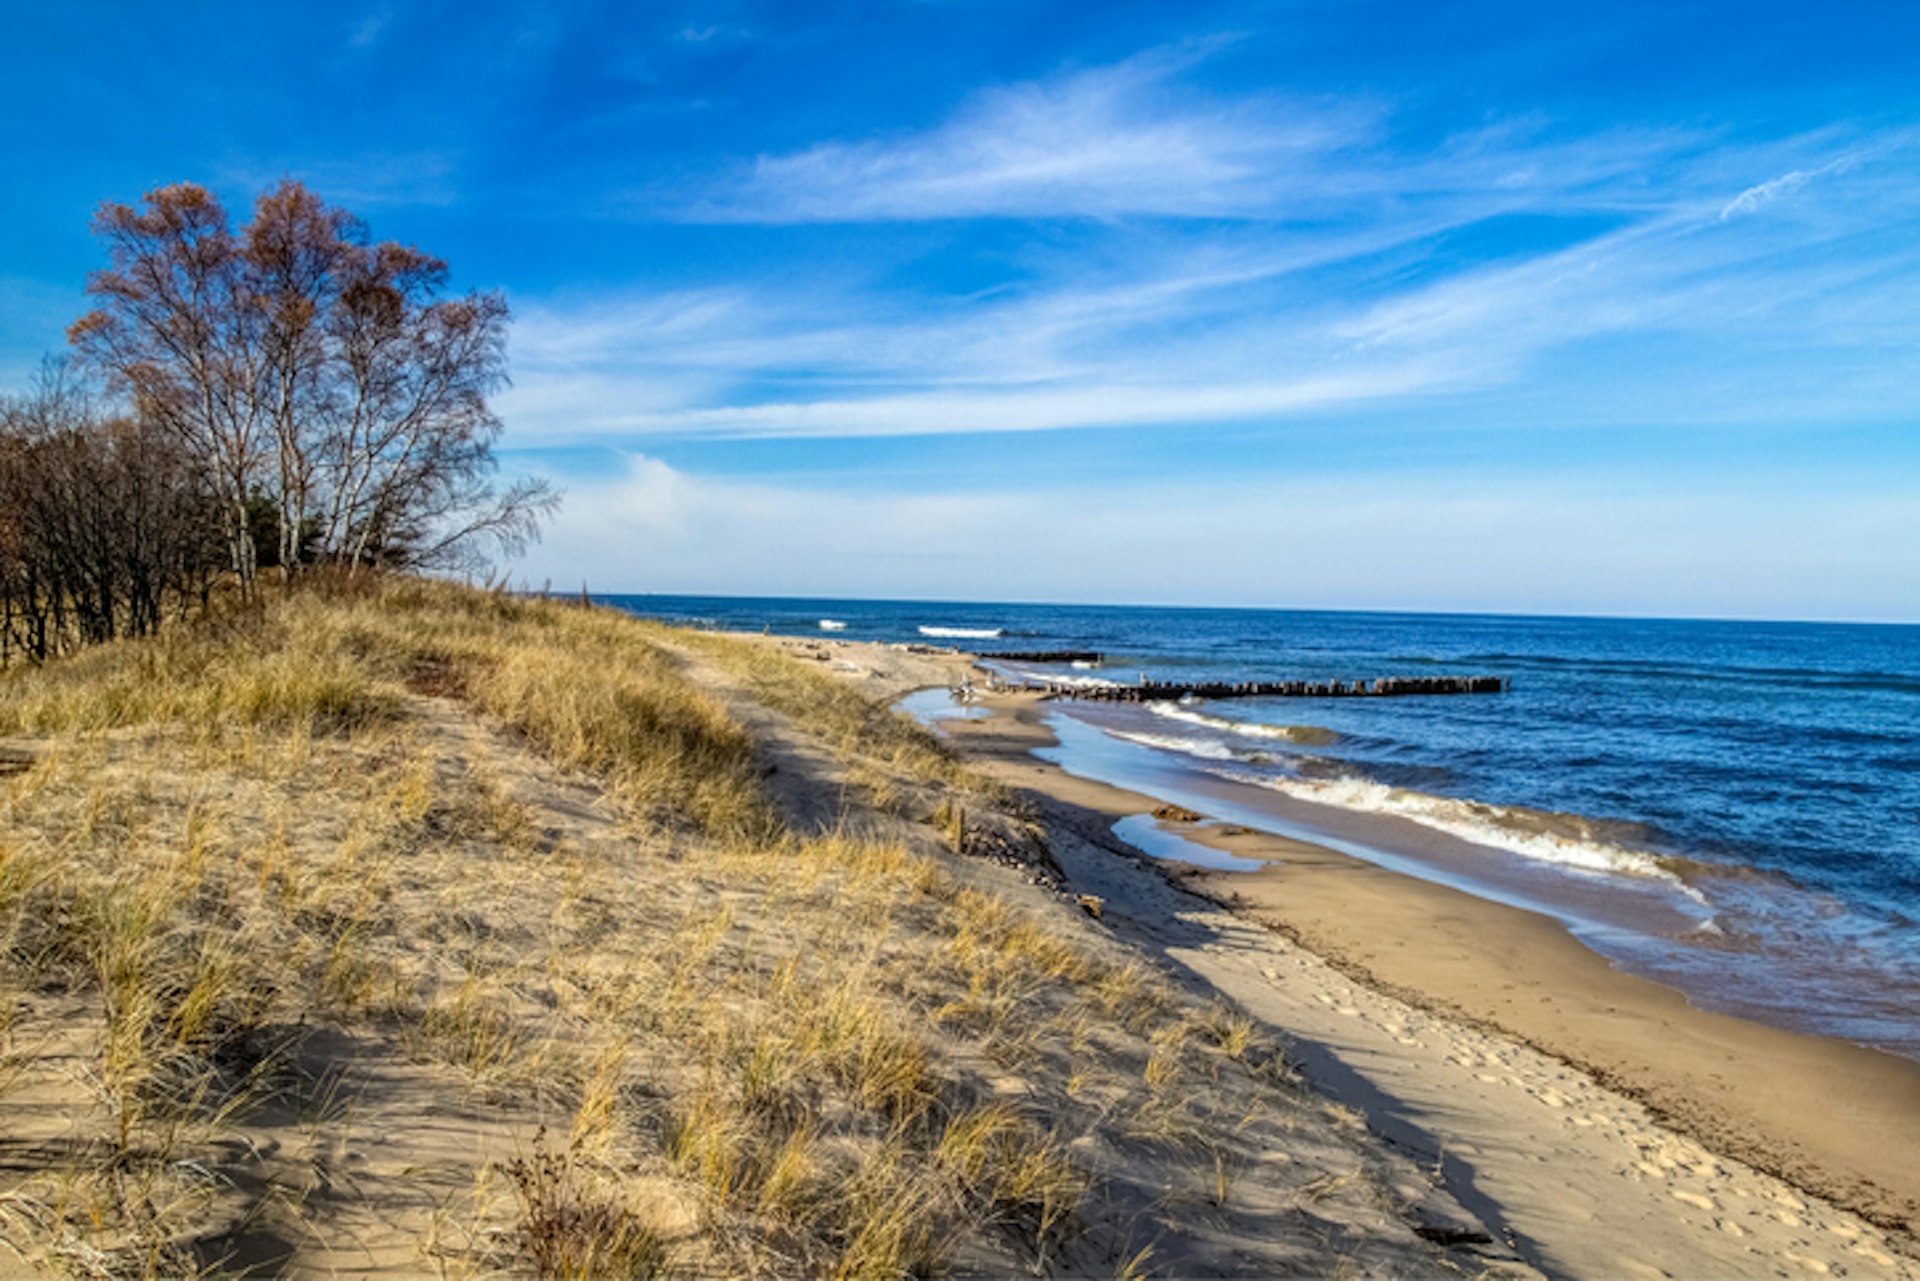 The wild and remote coast of Lake Superior at Whitefish Point in Michigan's Upper Peninsula. It was off this peaceful coast that the ill fated Edmund Fitzgerald sank in a Lake Superior storm. 